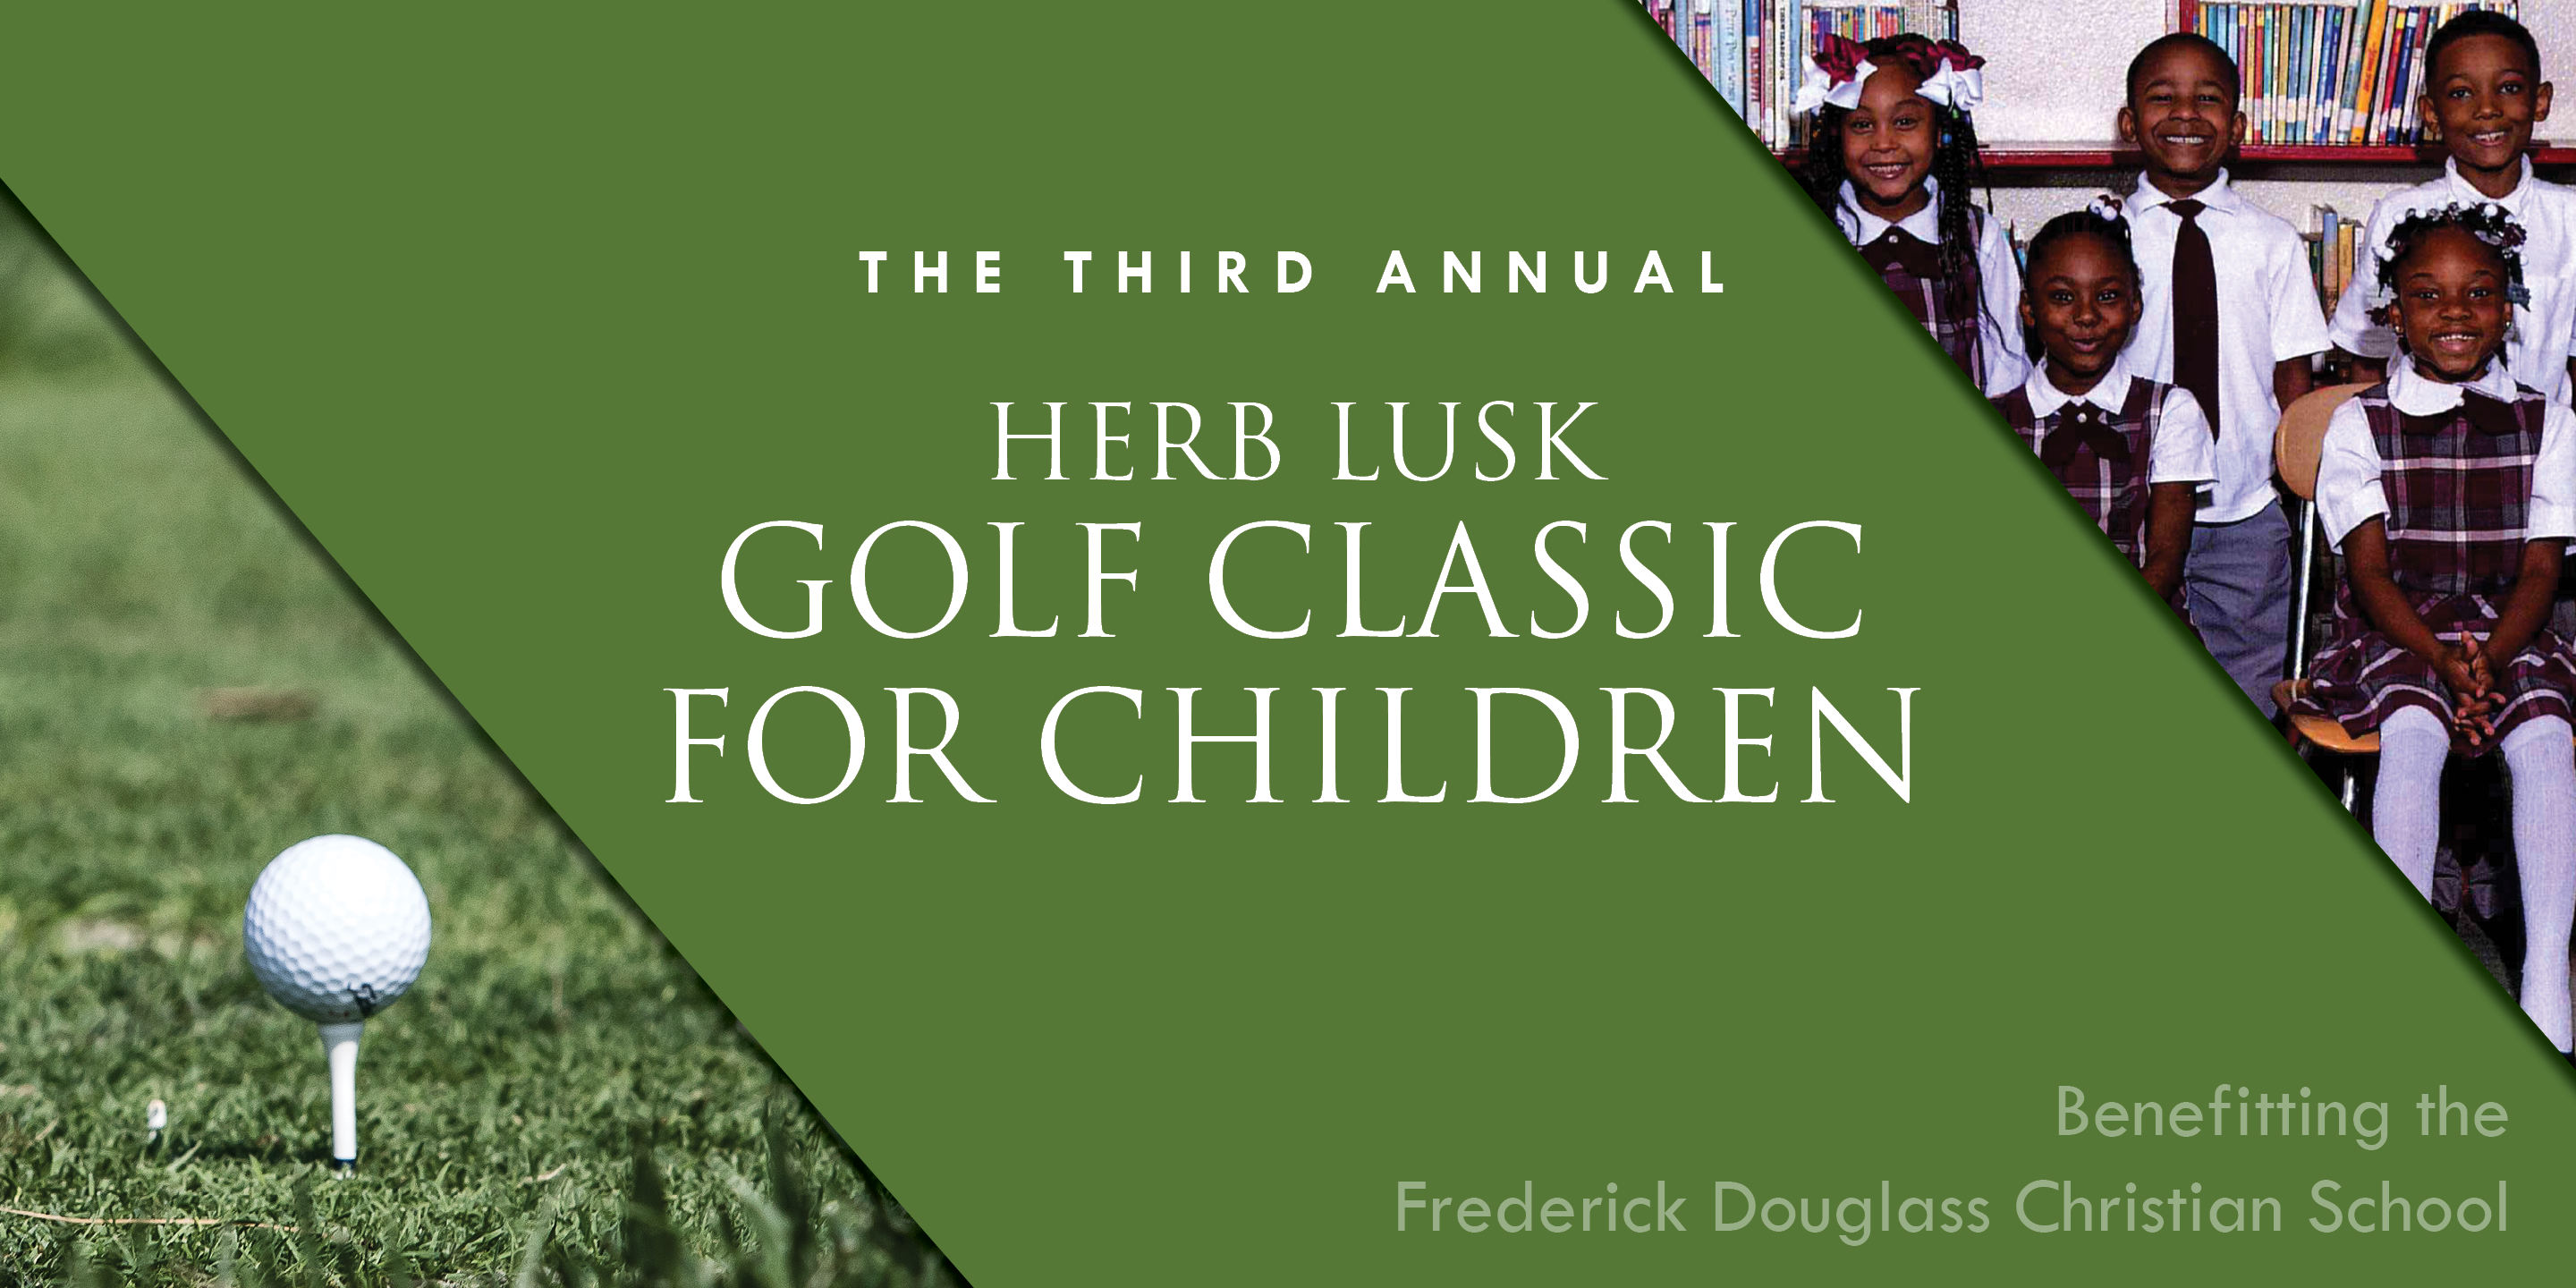 The Third Annual Herb Lusk Golf Classic for Children